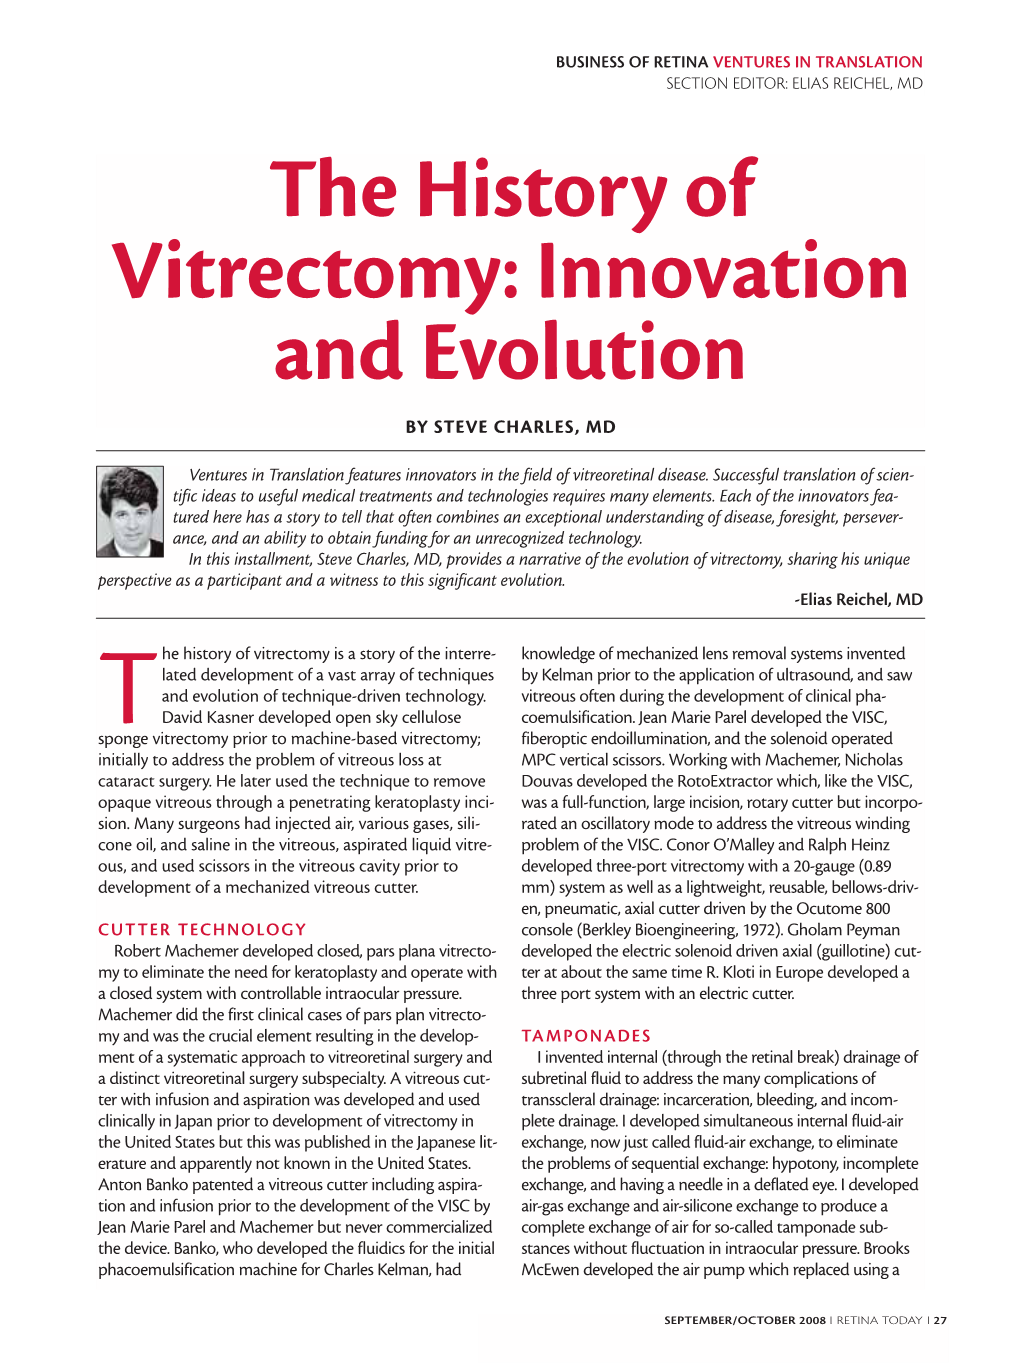 The History of Vitrectomy: Innovation and Evolution